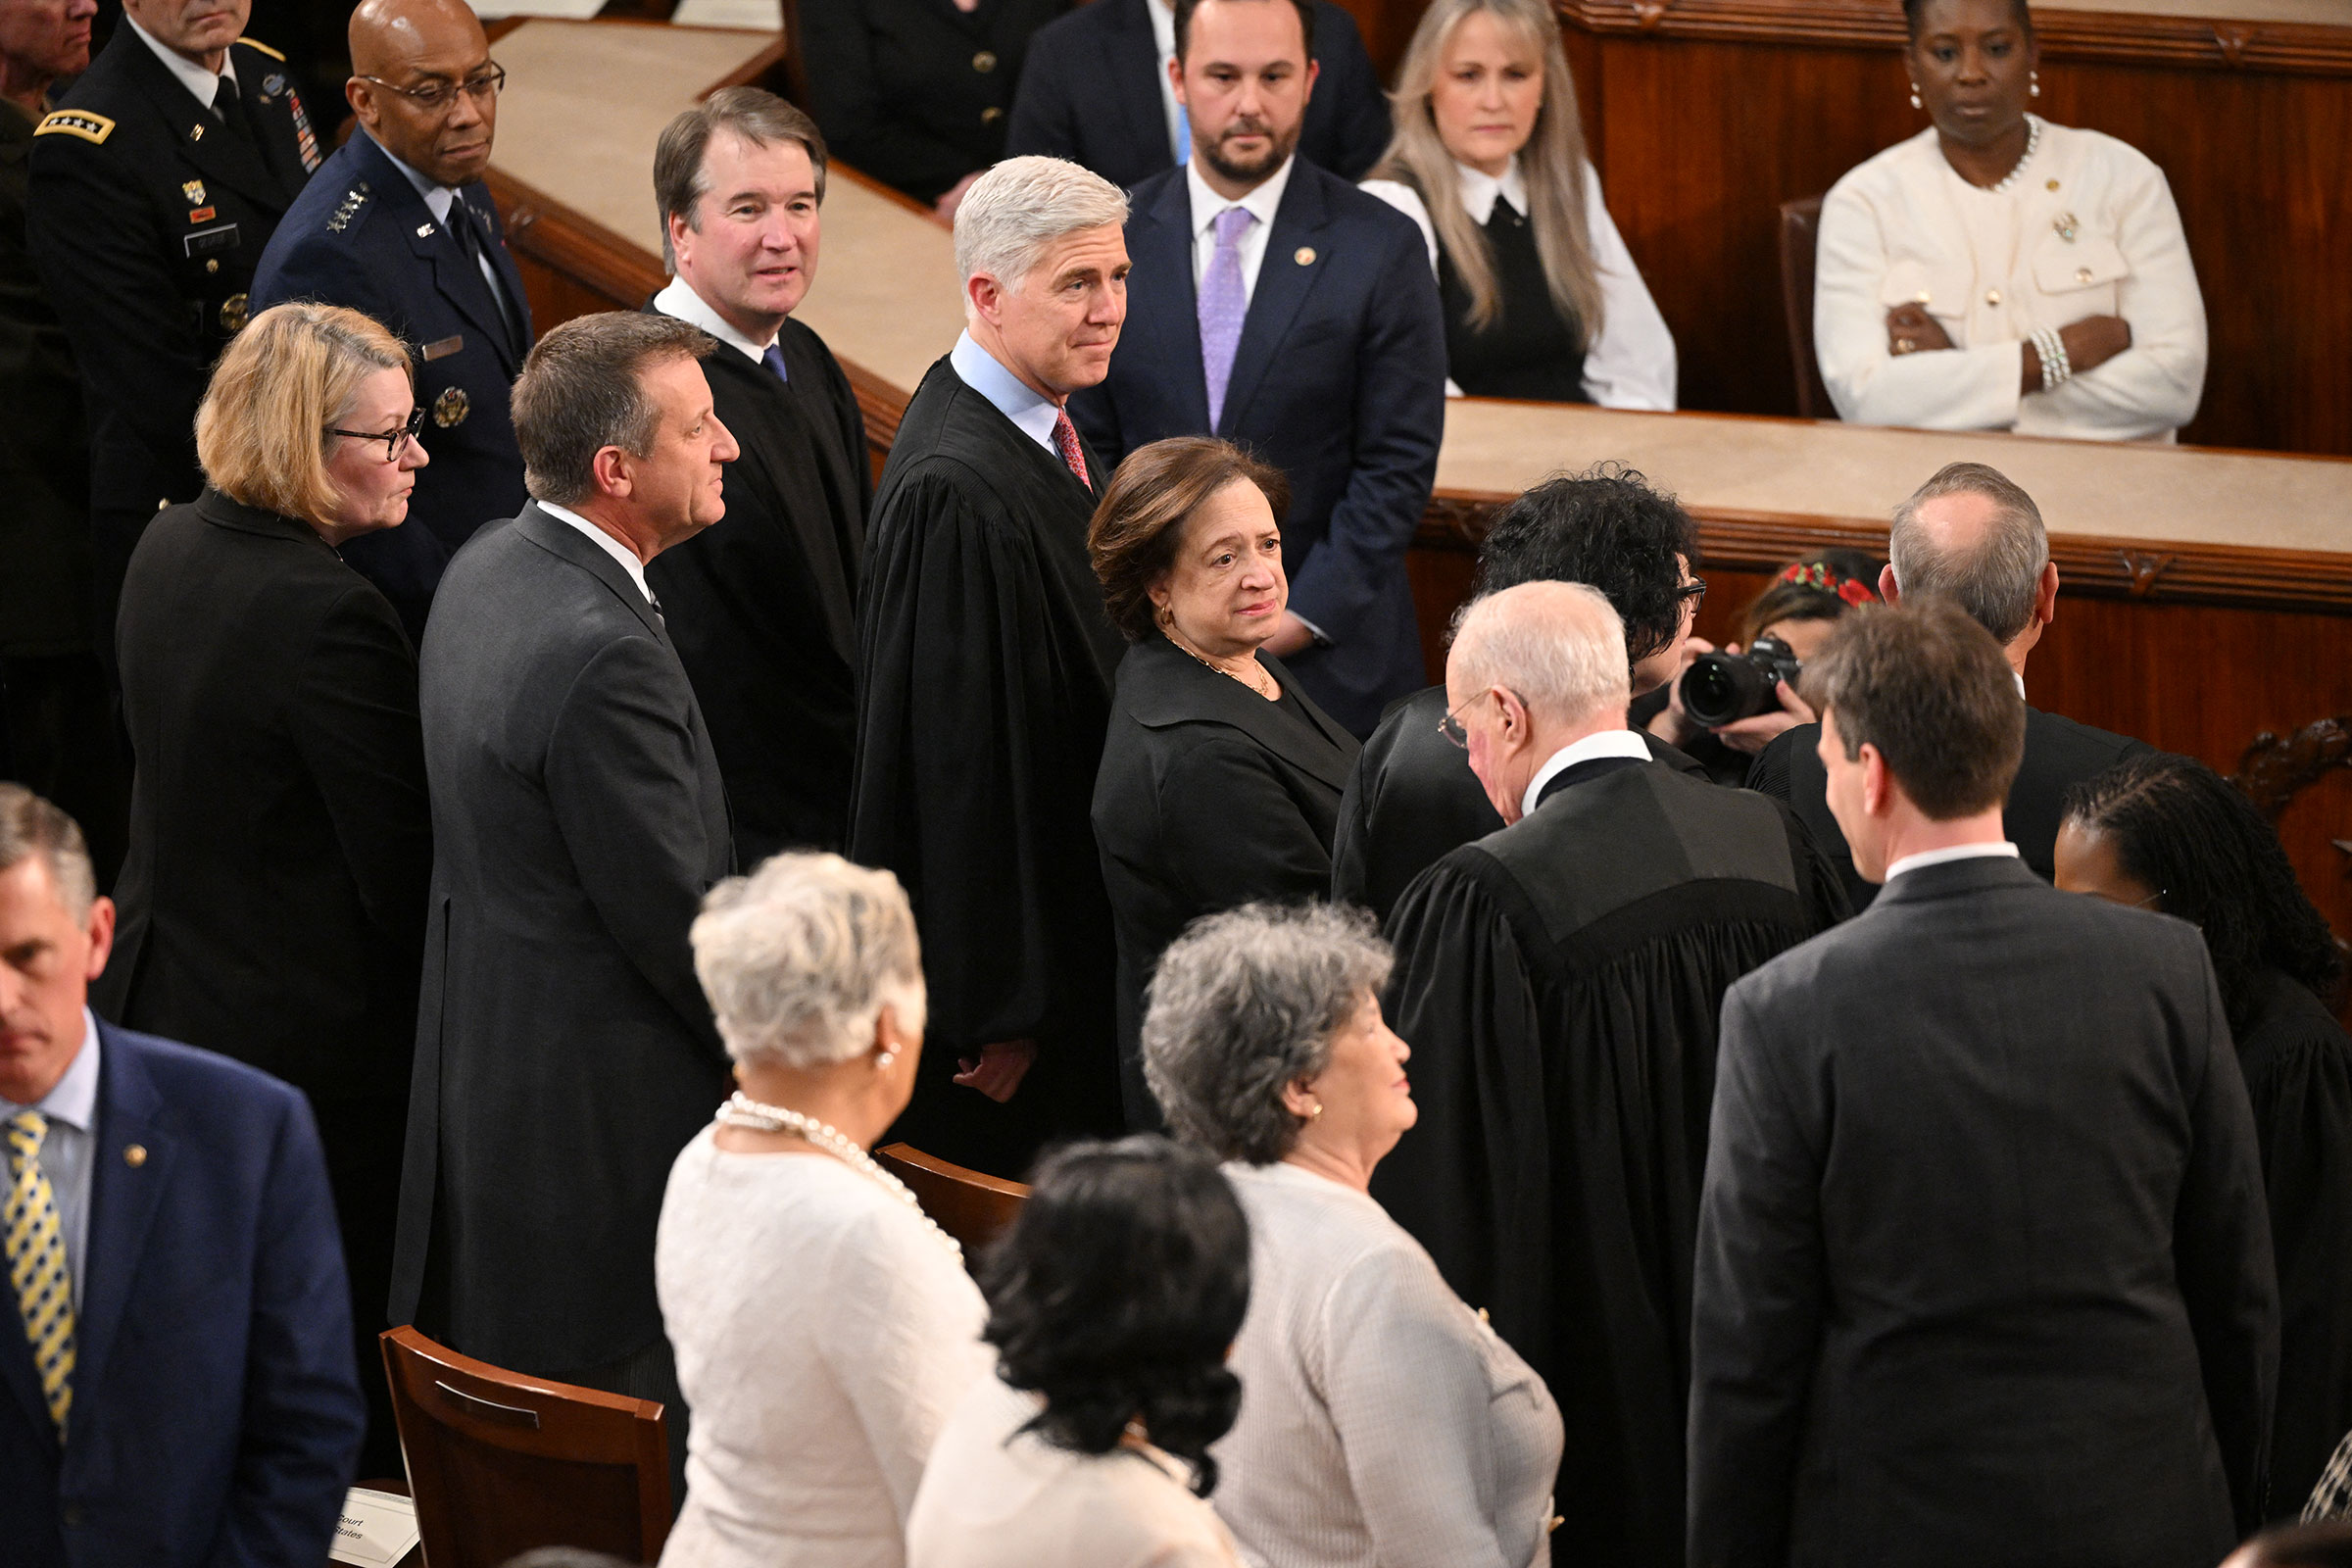 US Supreme Court Justices arrive to take their seats.